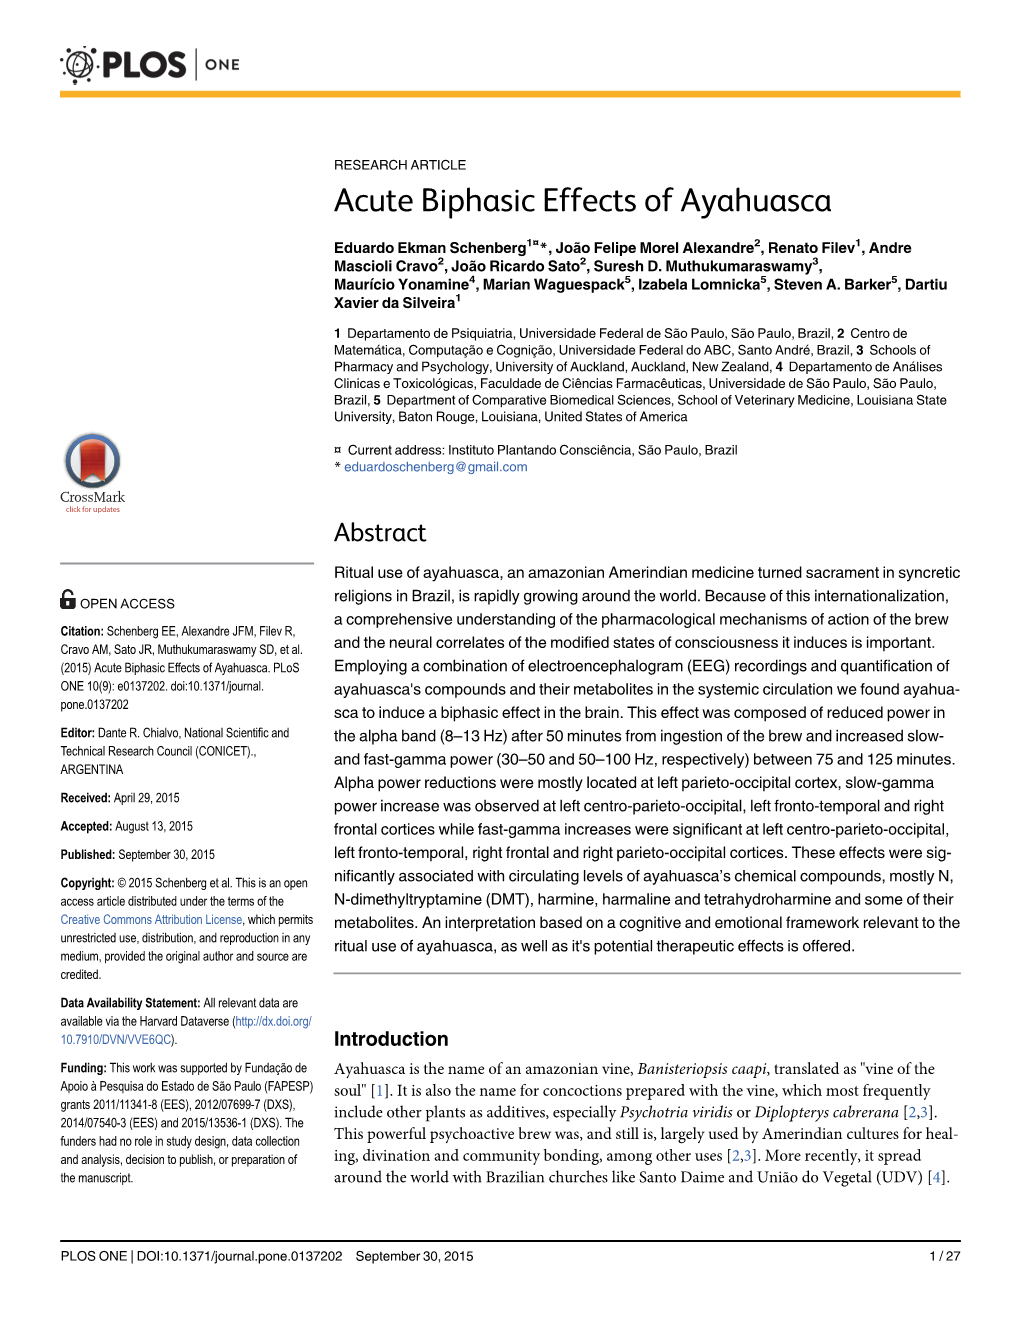 Acute Biphasic Effects of Ayahuasca